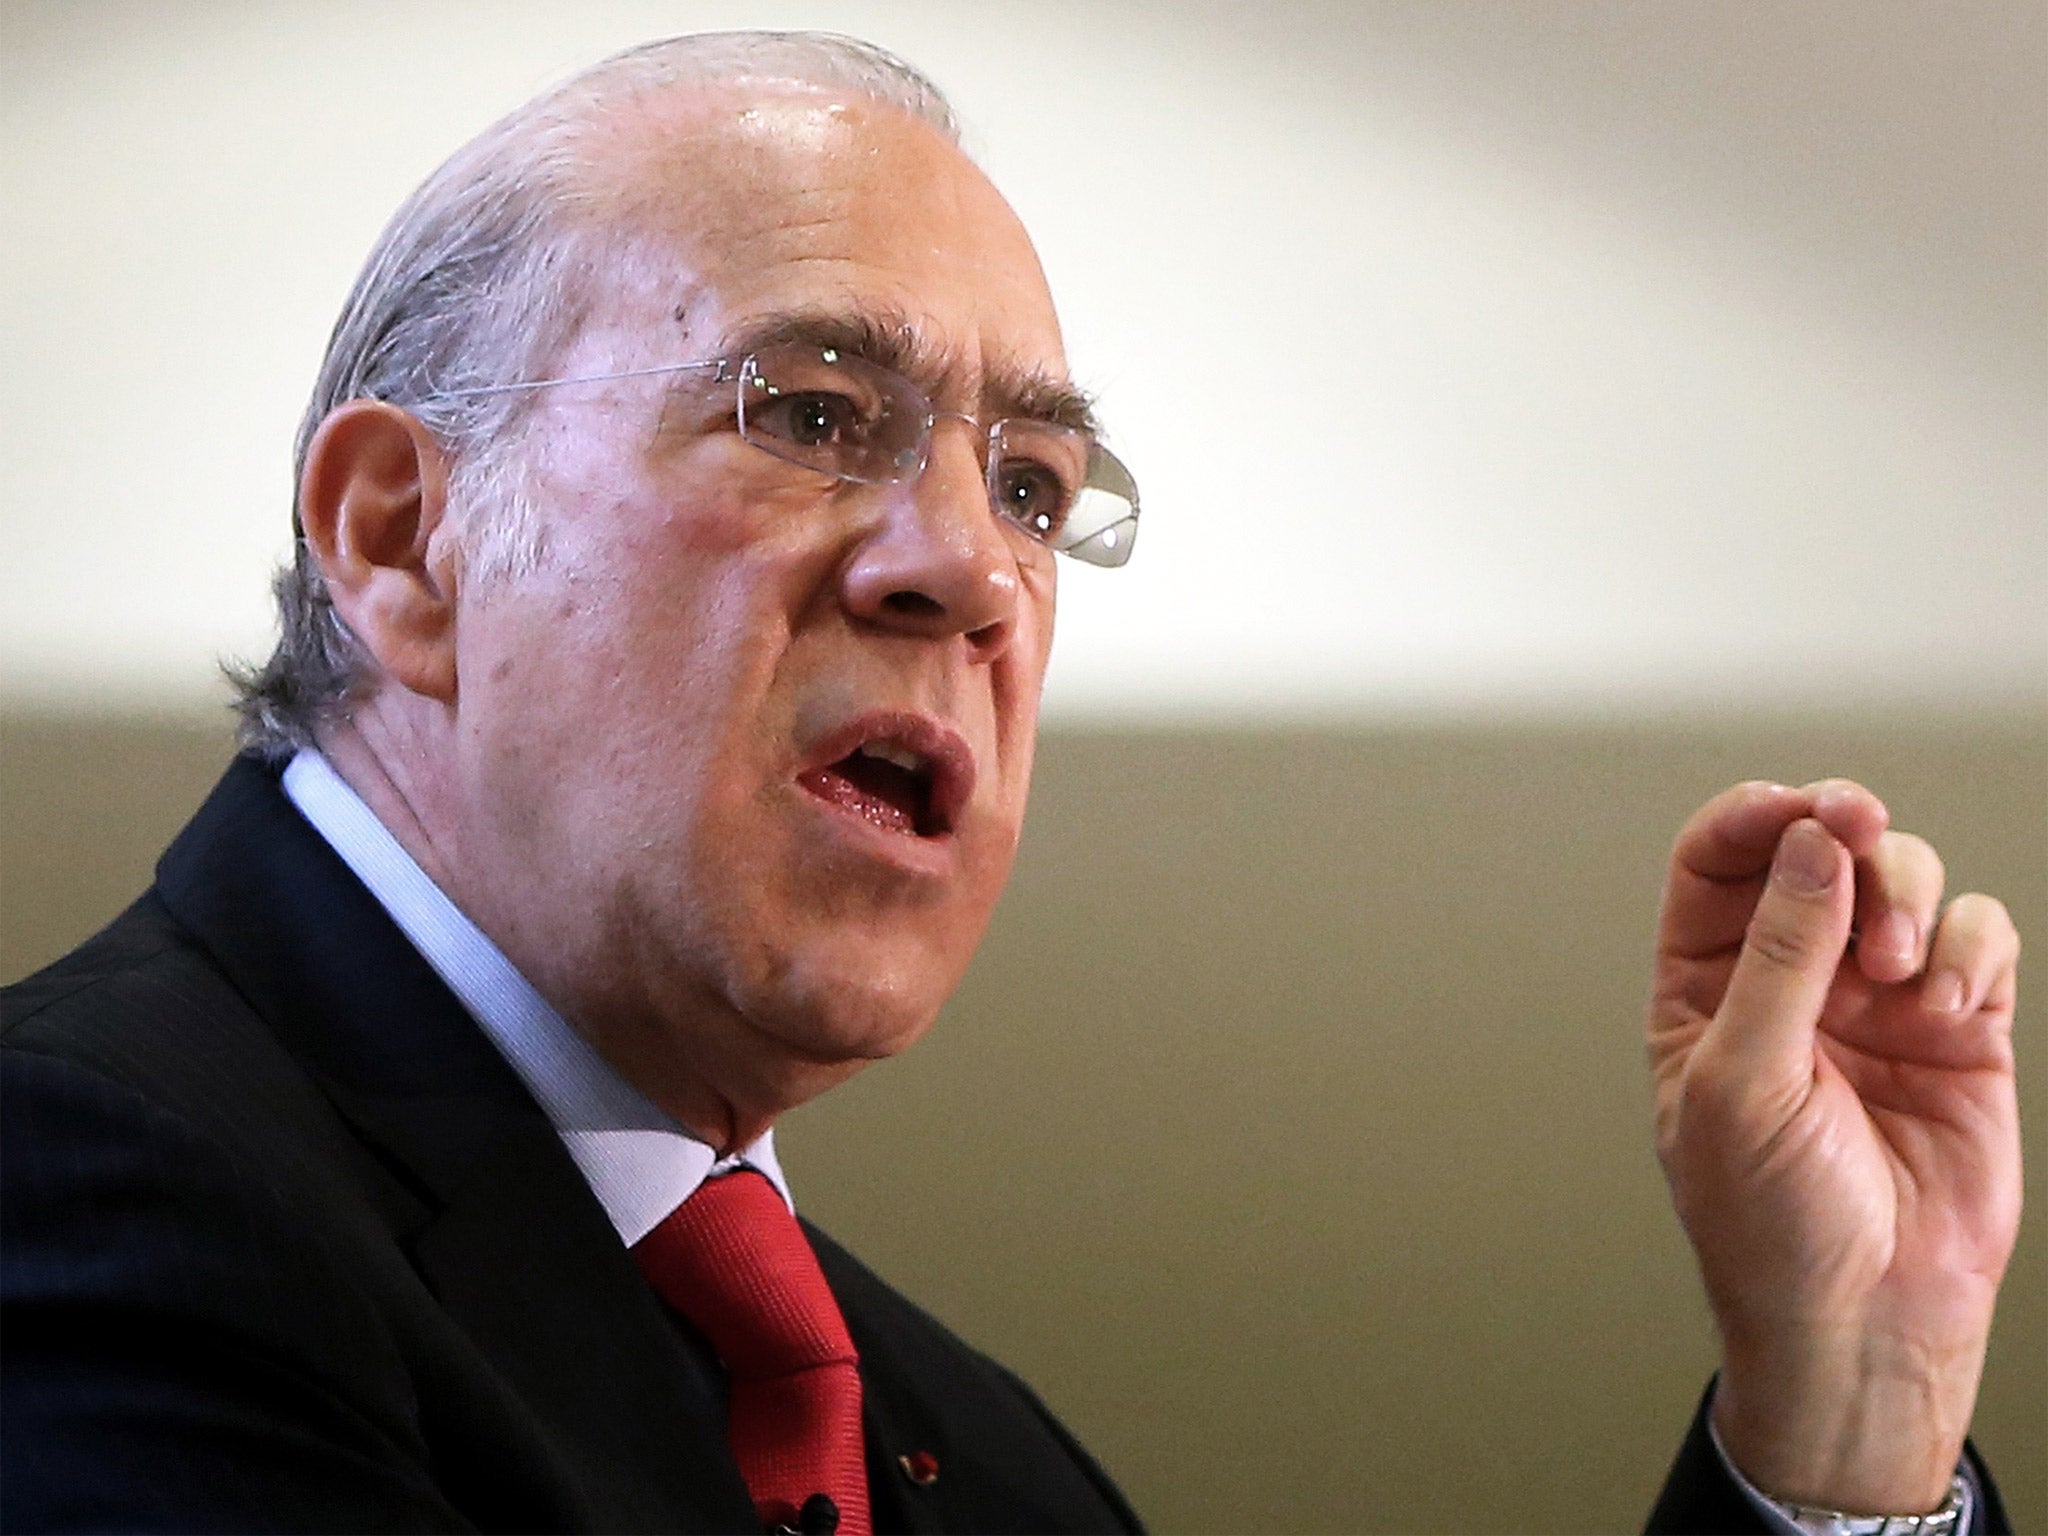 Angel Gurria hailed the Chancellor’s ‘effective economic policies’